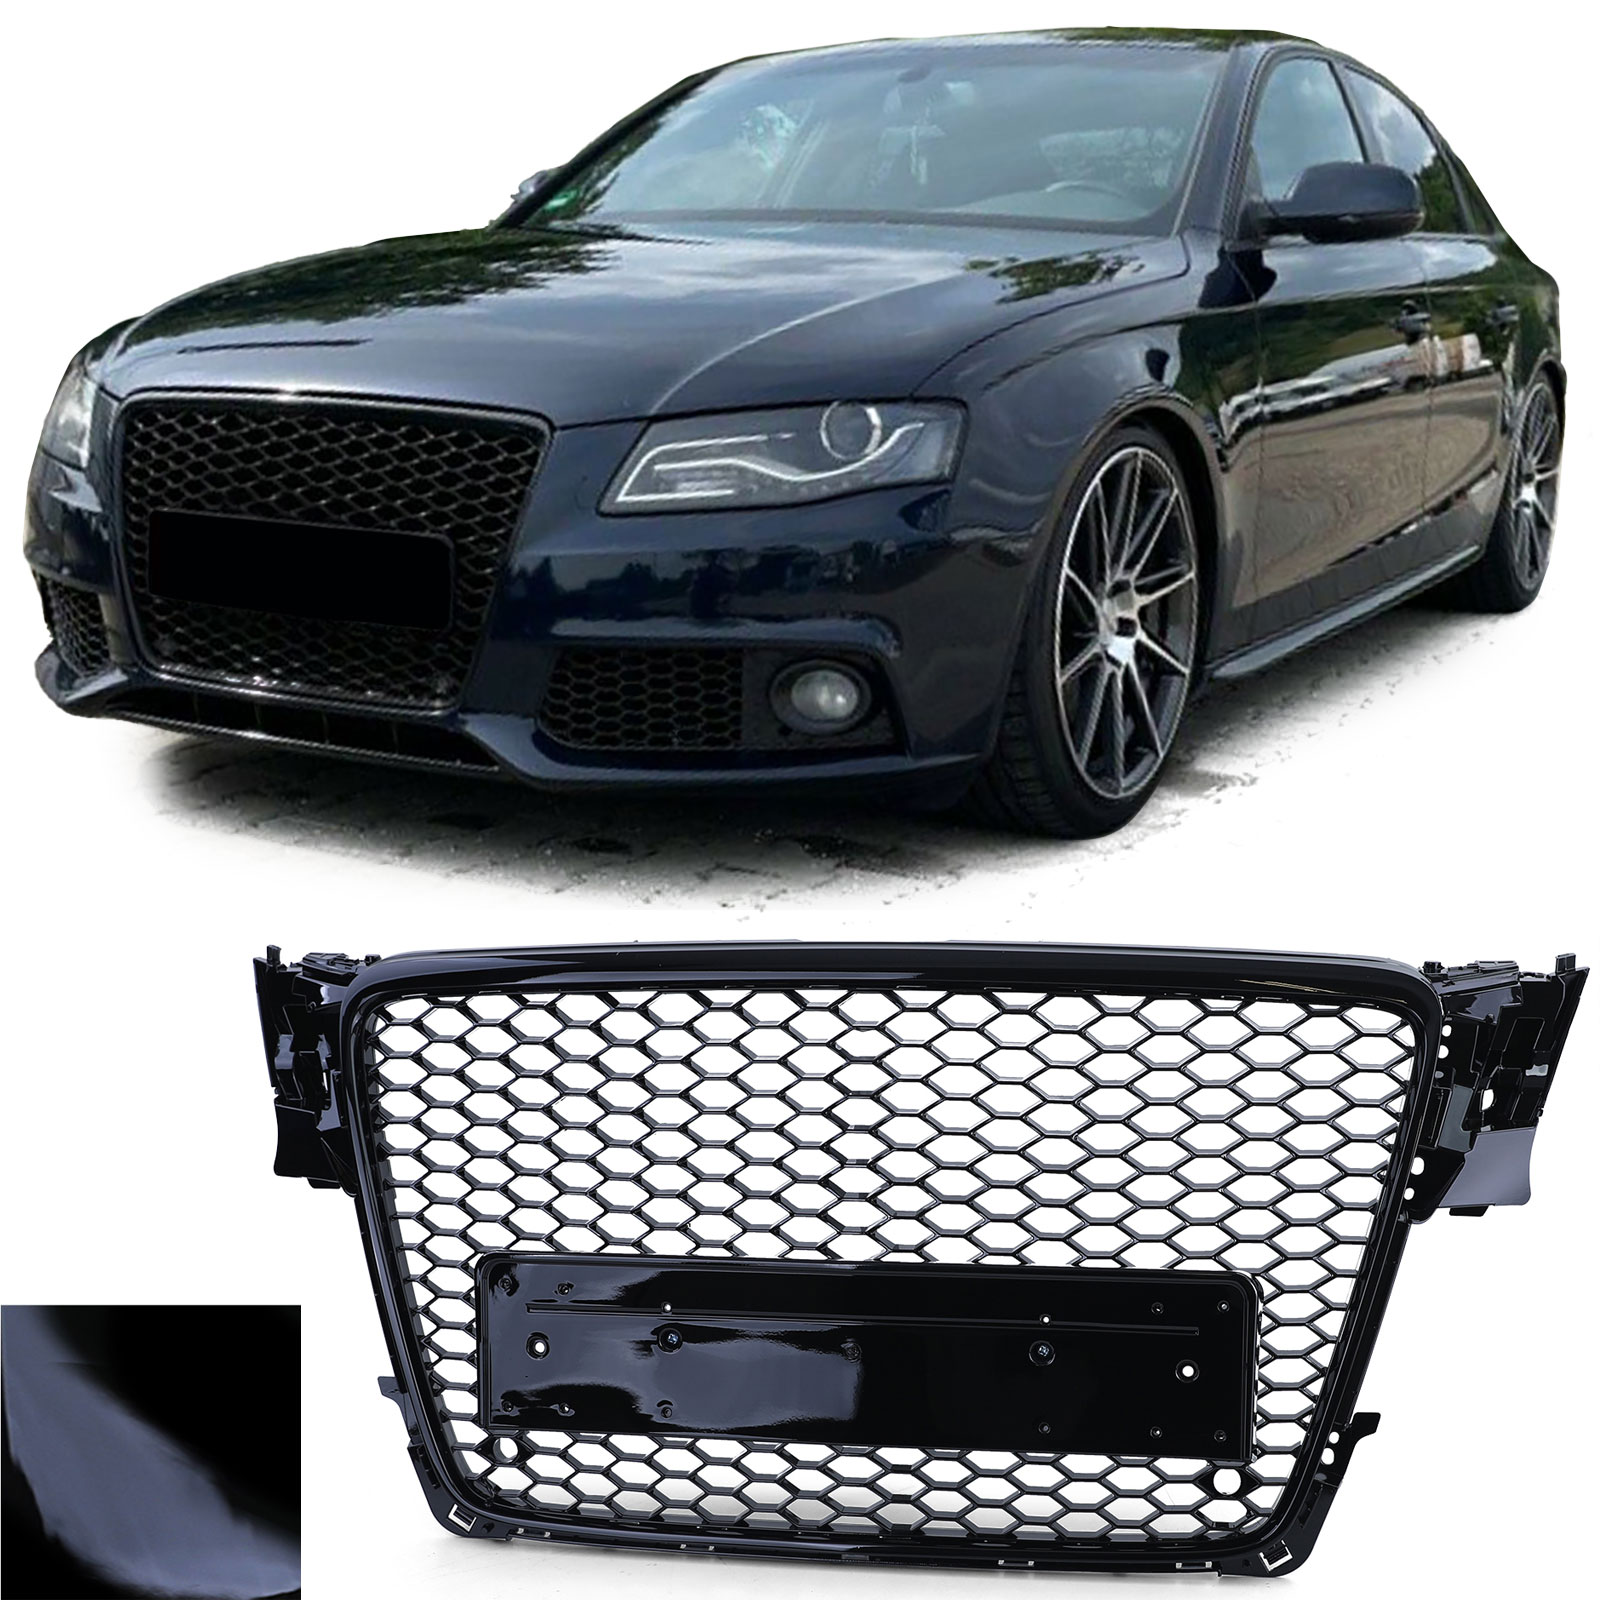 Grille Sports Honeycomb Black Gloss for Audi A4 B8 8K Since 2007